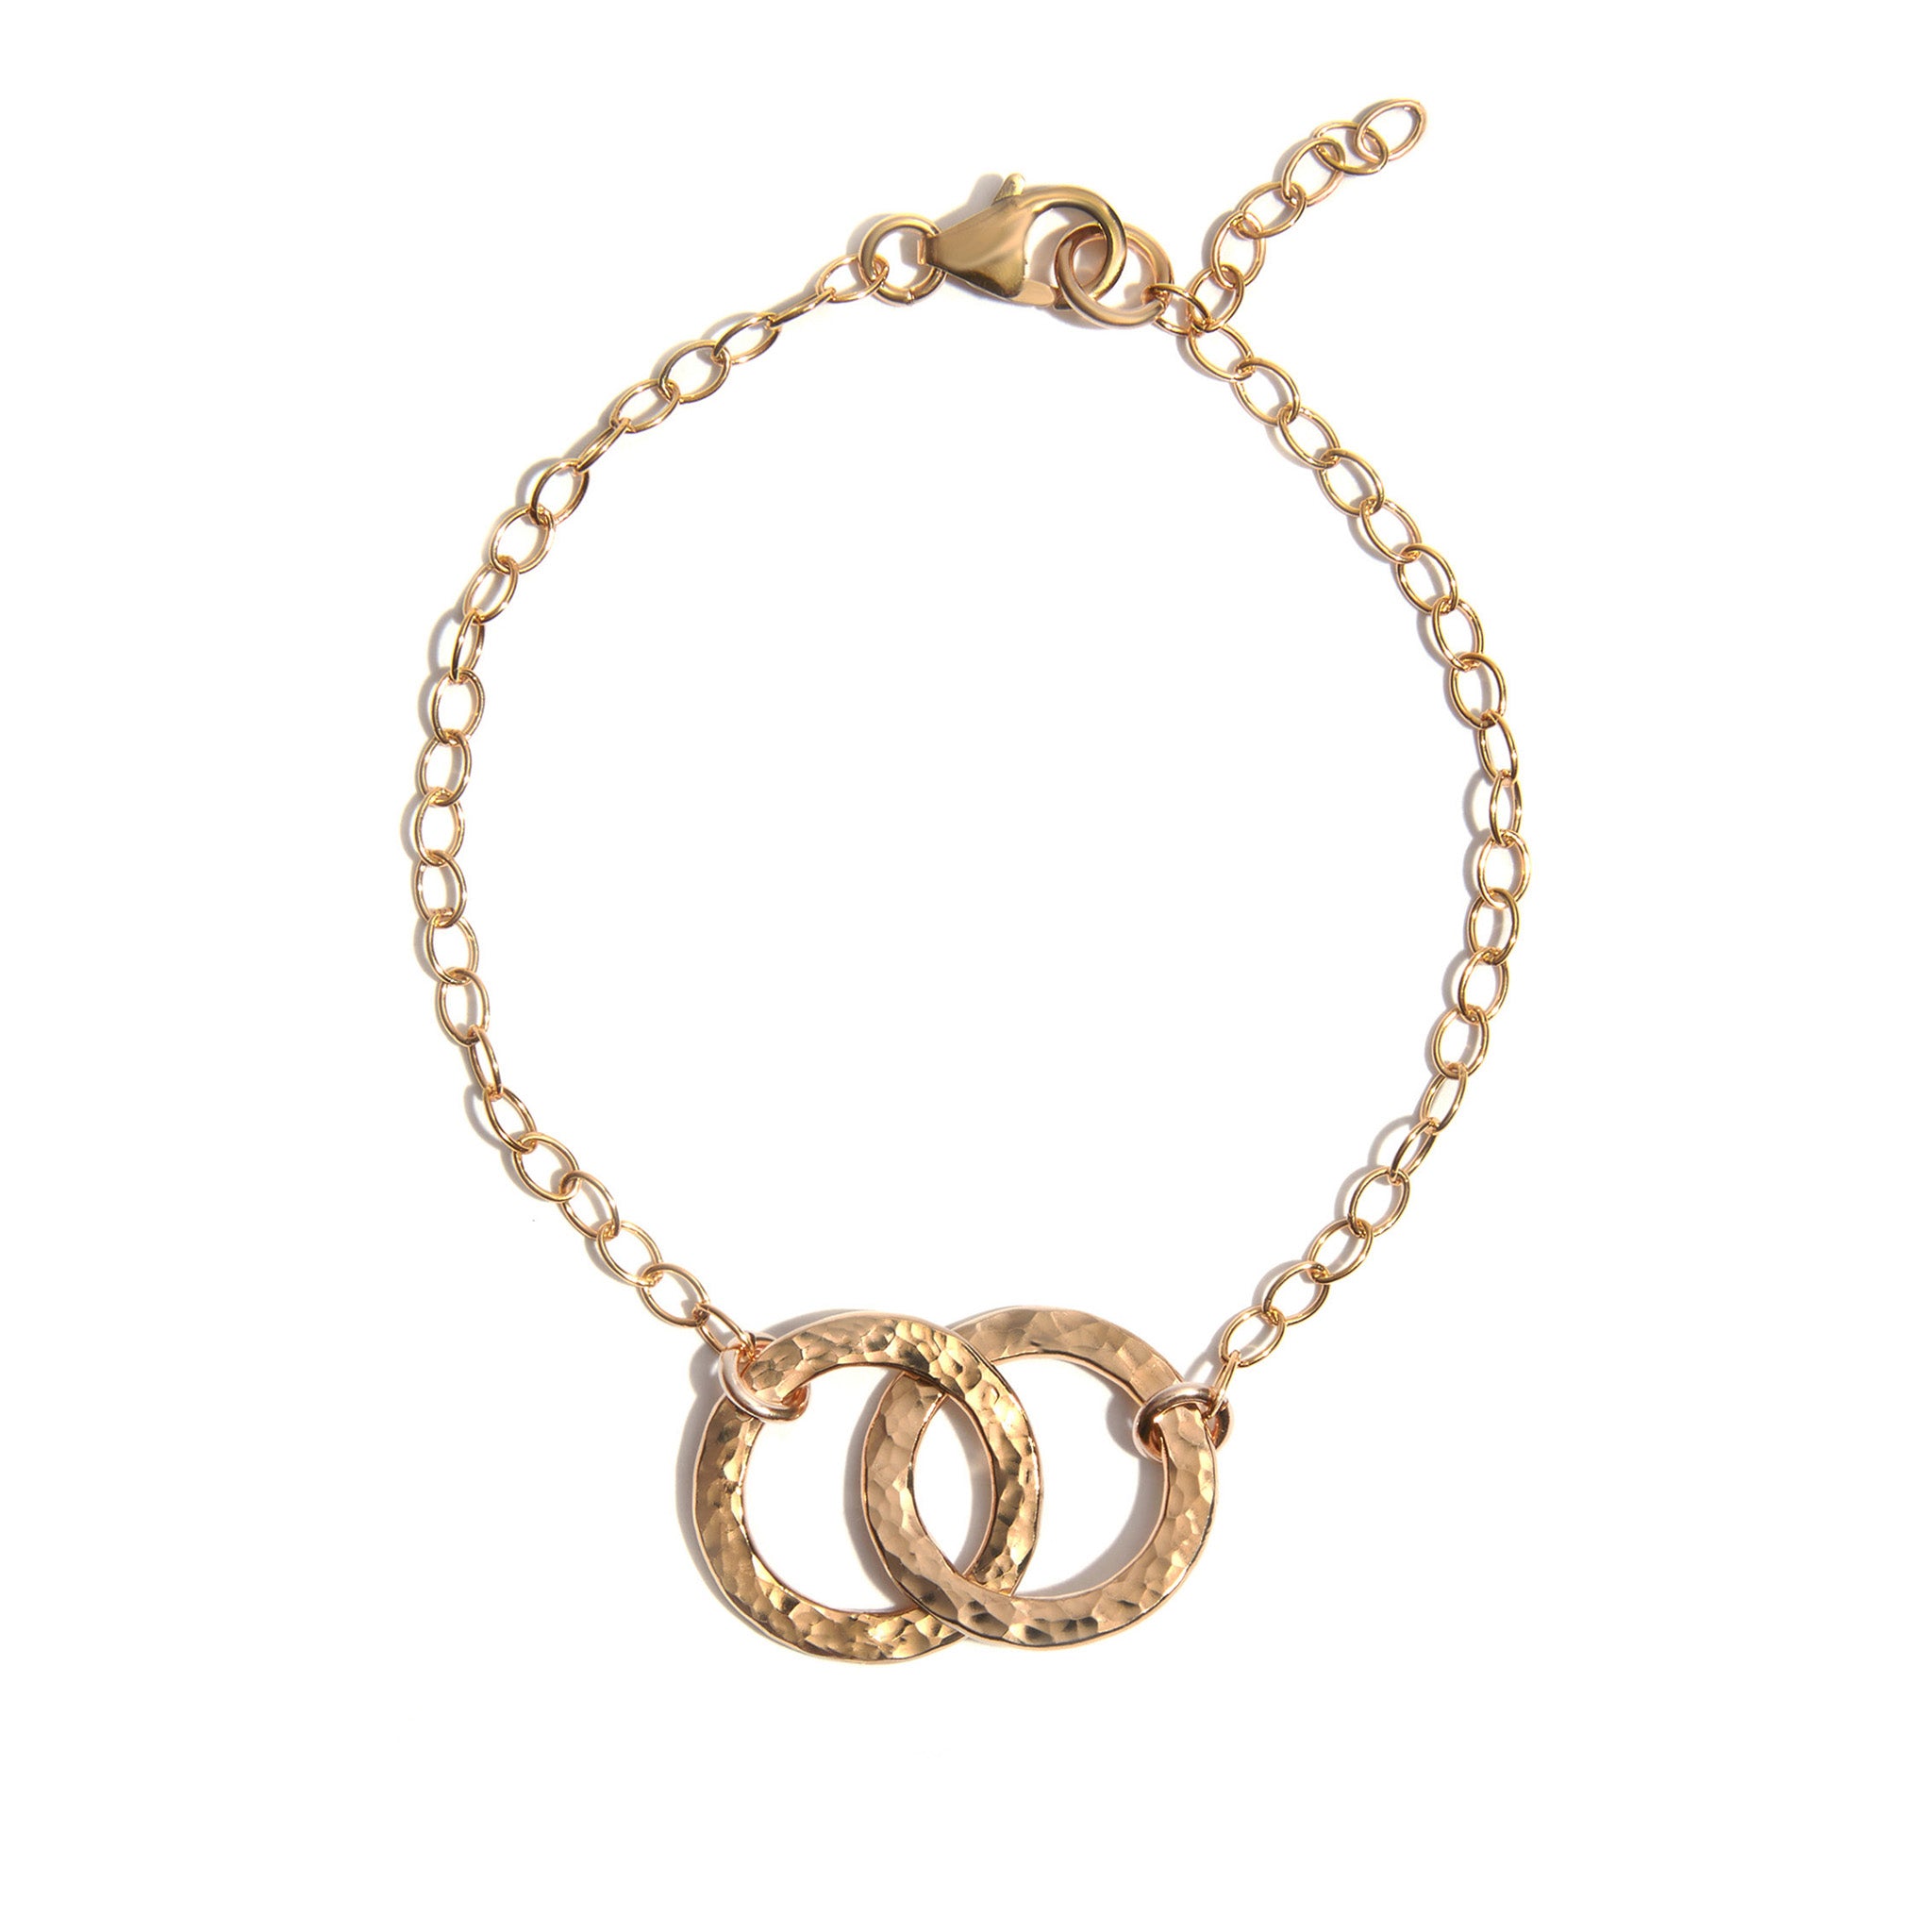 Our Interlinking Circle Bracelet features two classic Seoidín hammered circles interlinking on a chain bracelet. Full of symbolism, this bracelet makes the perfect gift to give.